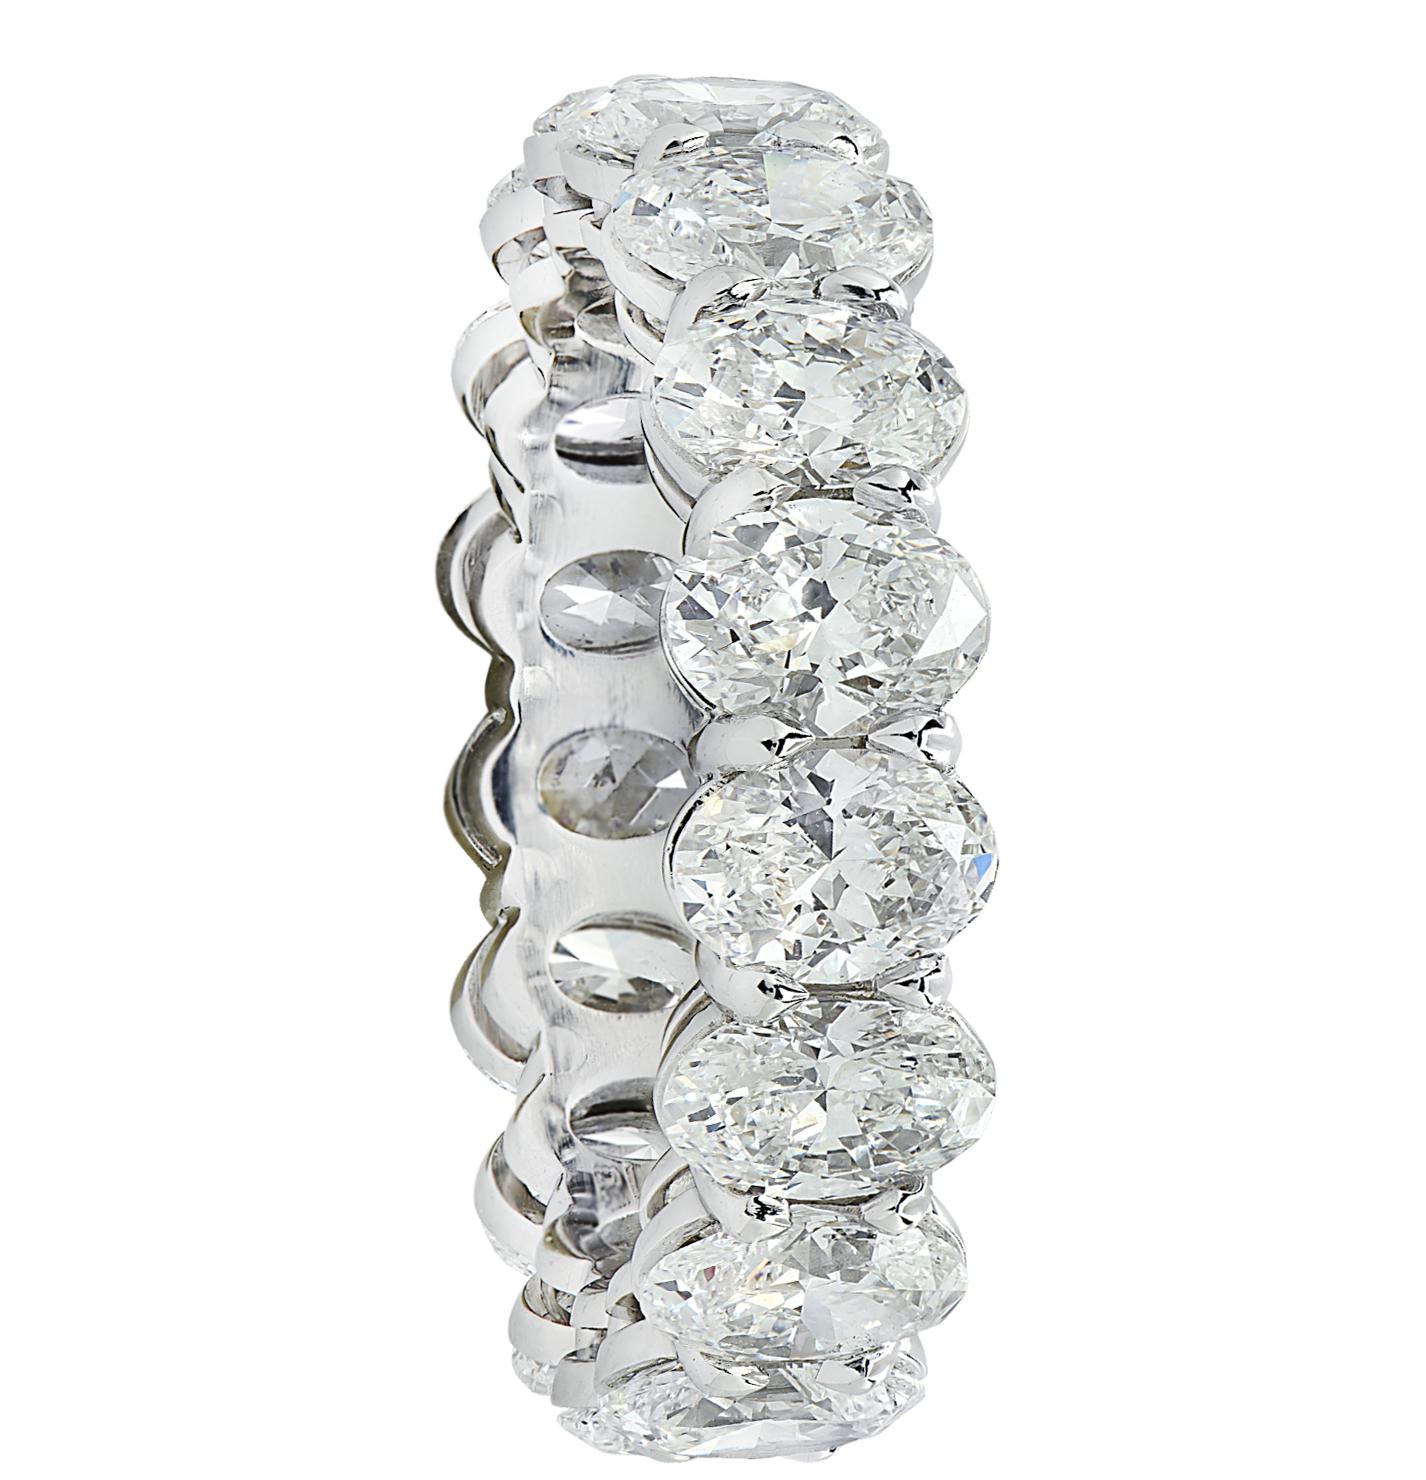 Exquisite Vivid Diamonds eternity band crafted in Platinum, showcasing 17 stunning GIA certified oval diamonds weighing 5.35 carats total, D-E color, VVS-VS clarity. Each diamond was carefully selected, perfectly matched and set in a seamless sea of